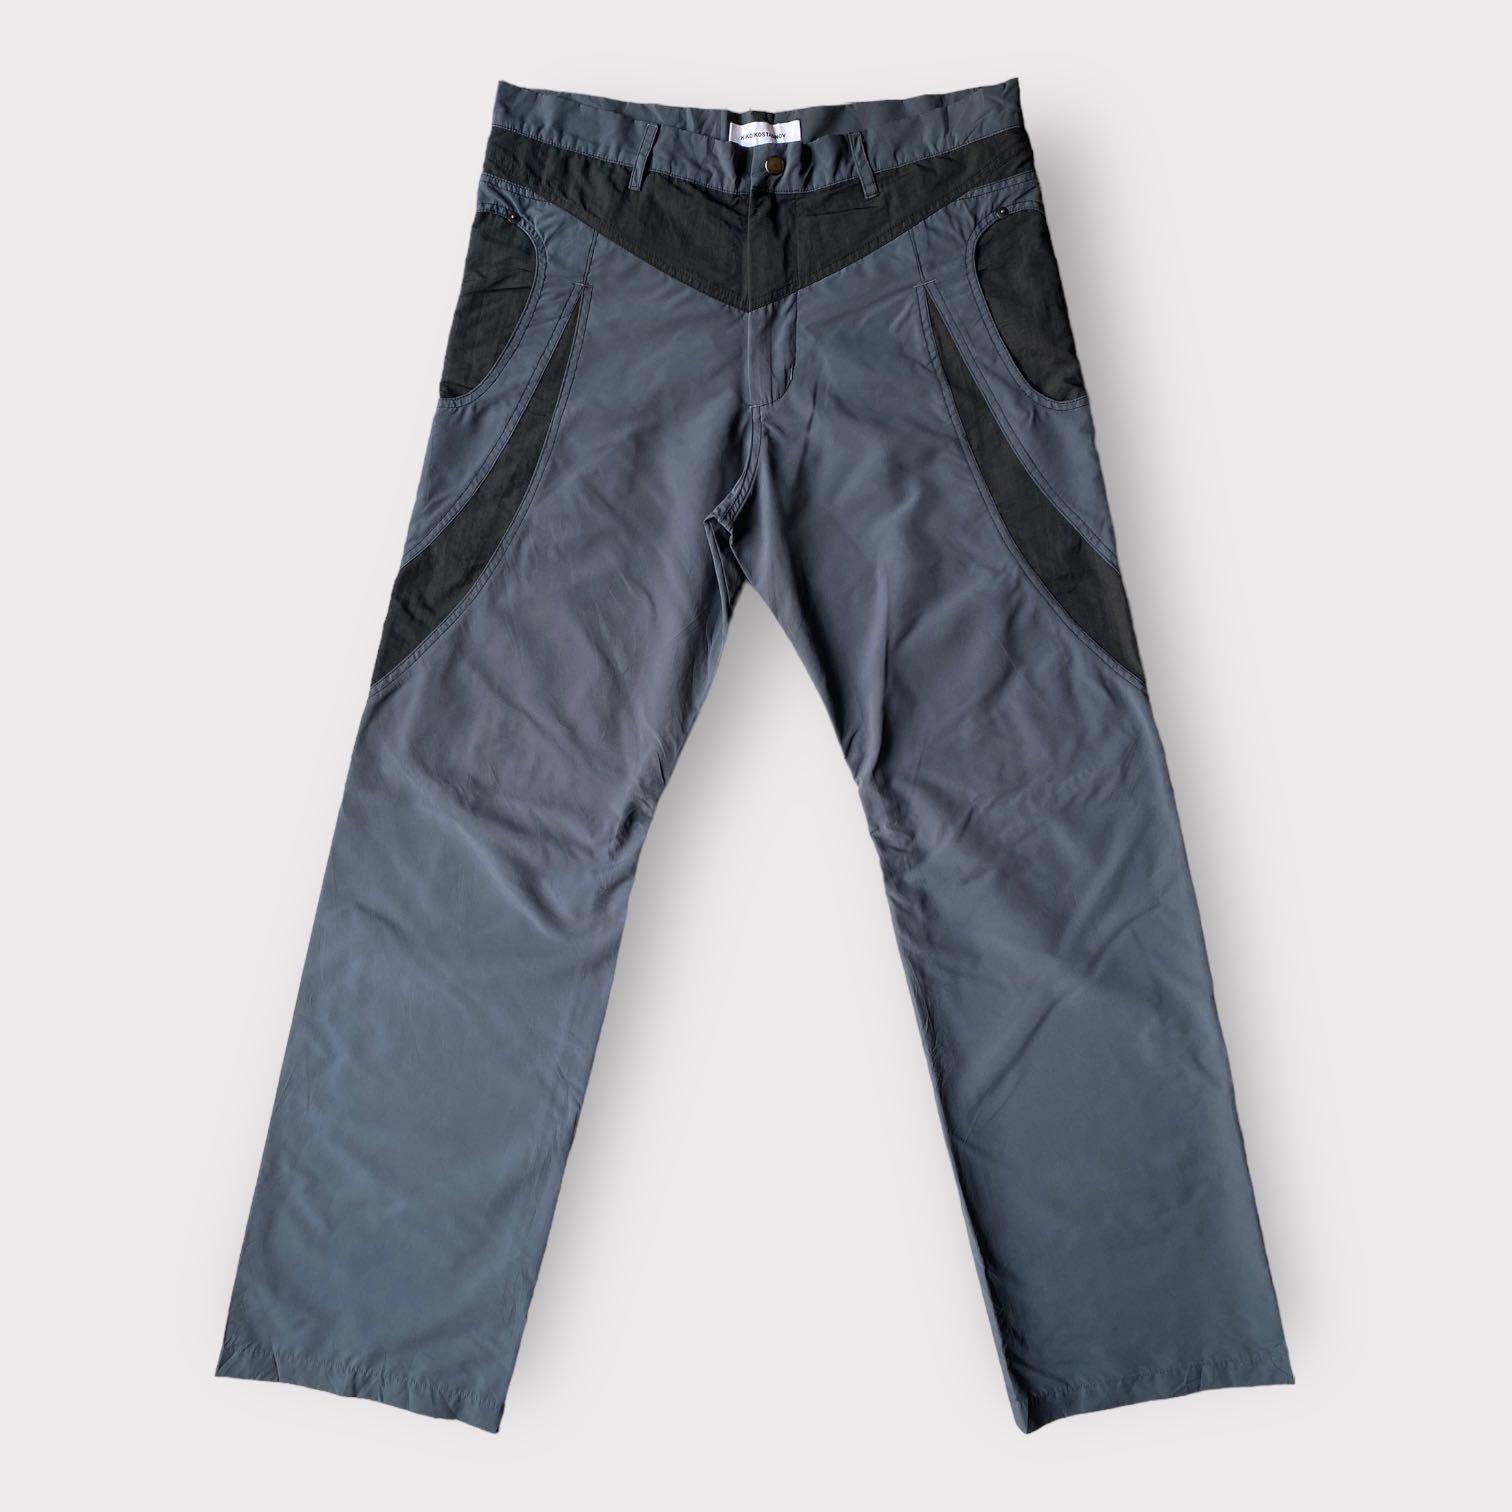 SS20 Rinding Claw Pants - 1